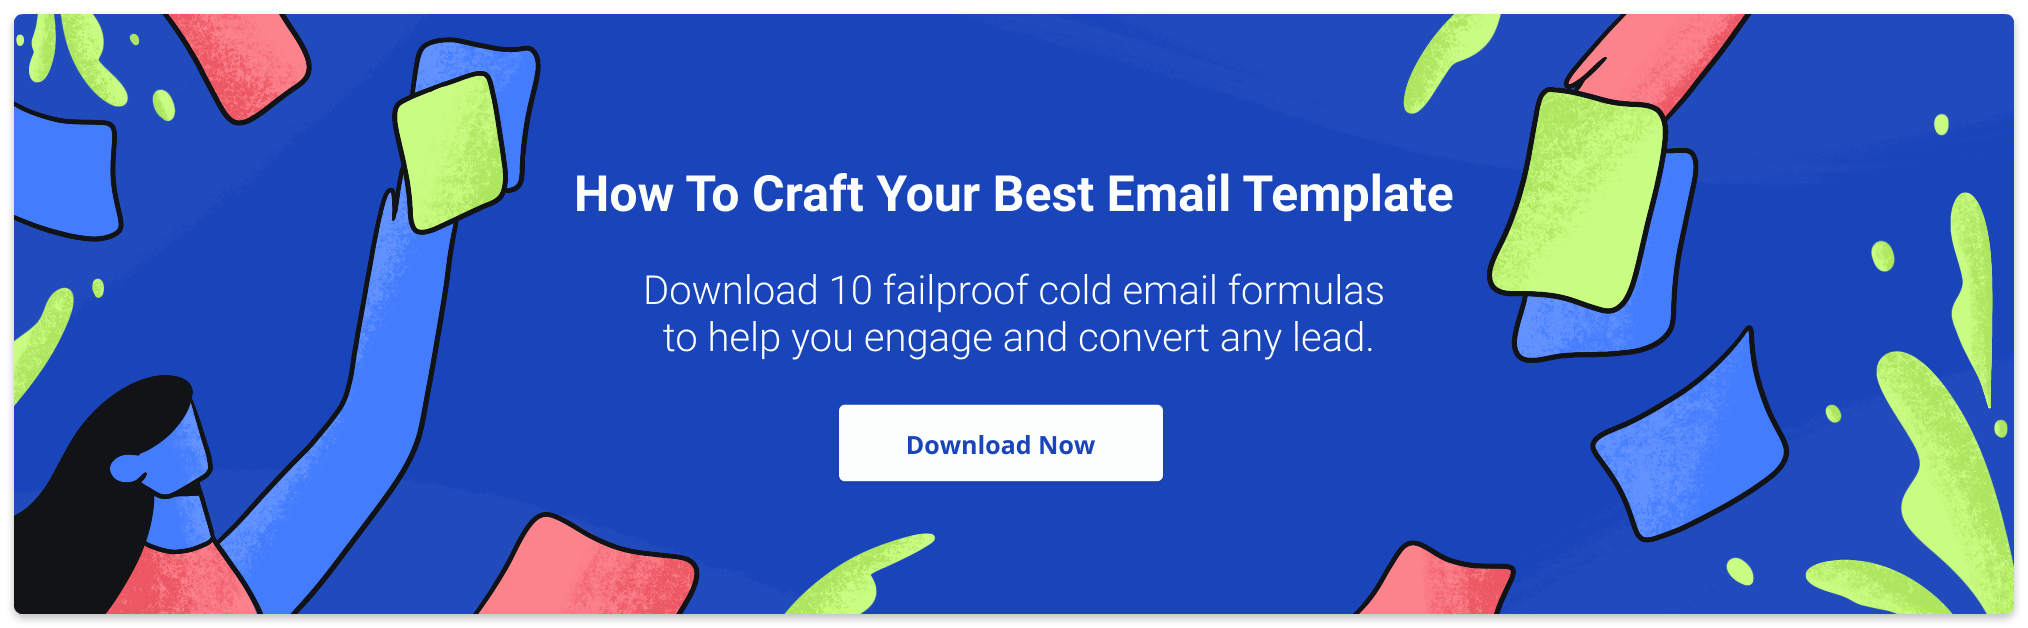 10 failproof cold email formulas